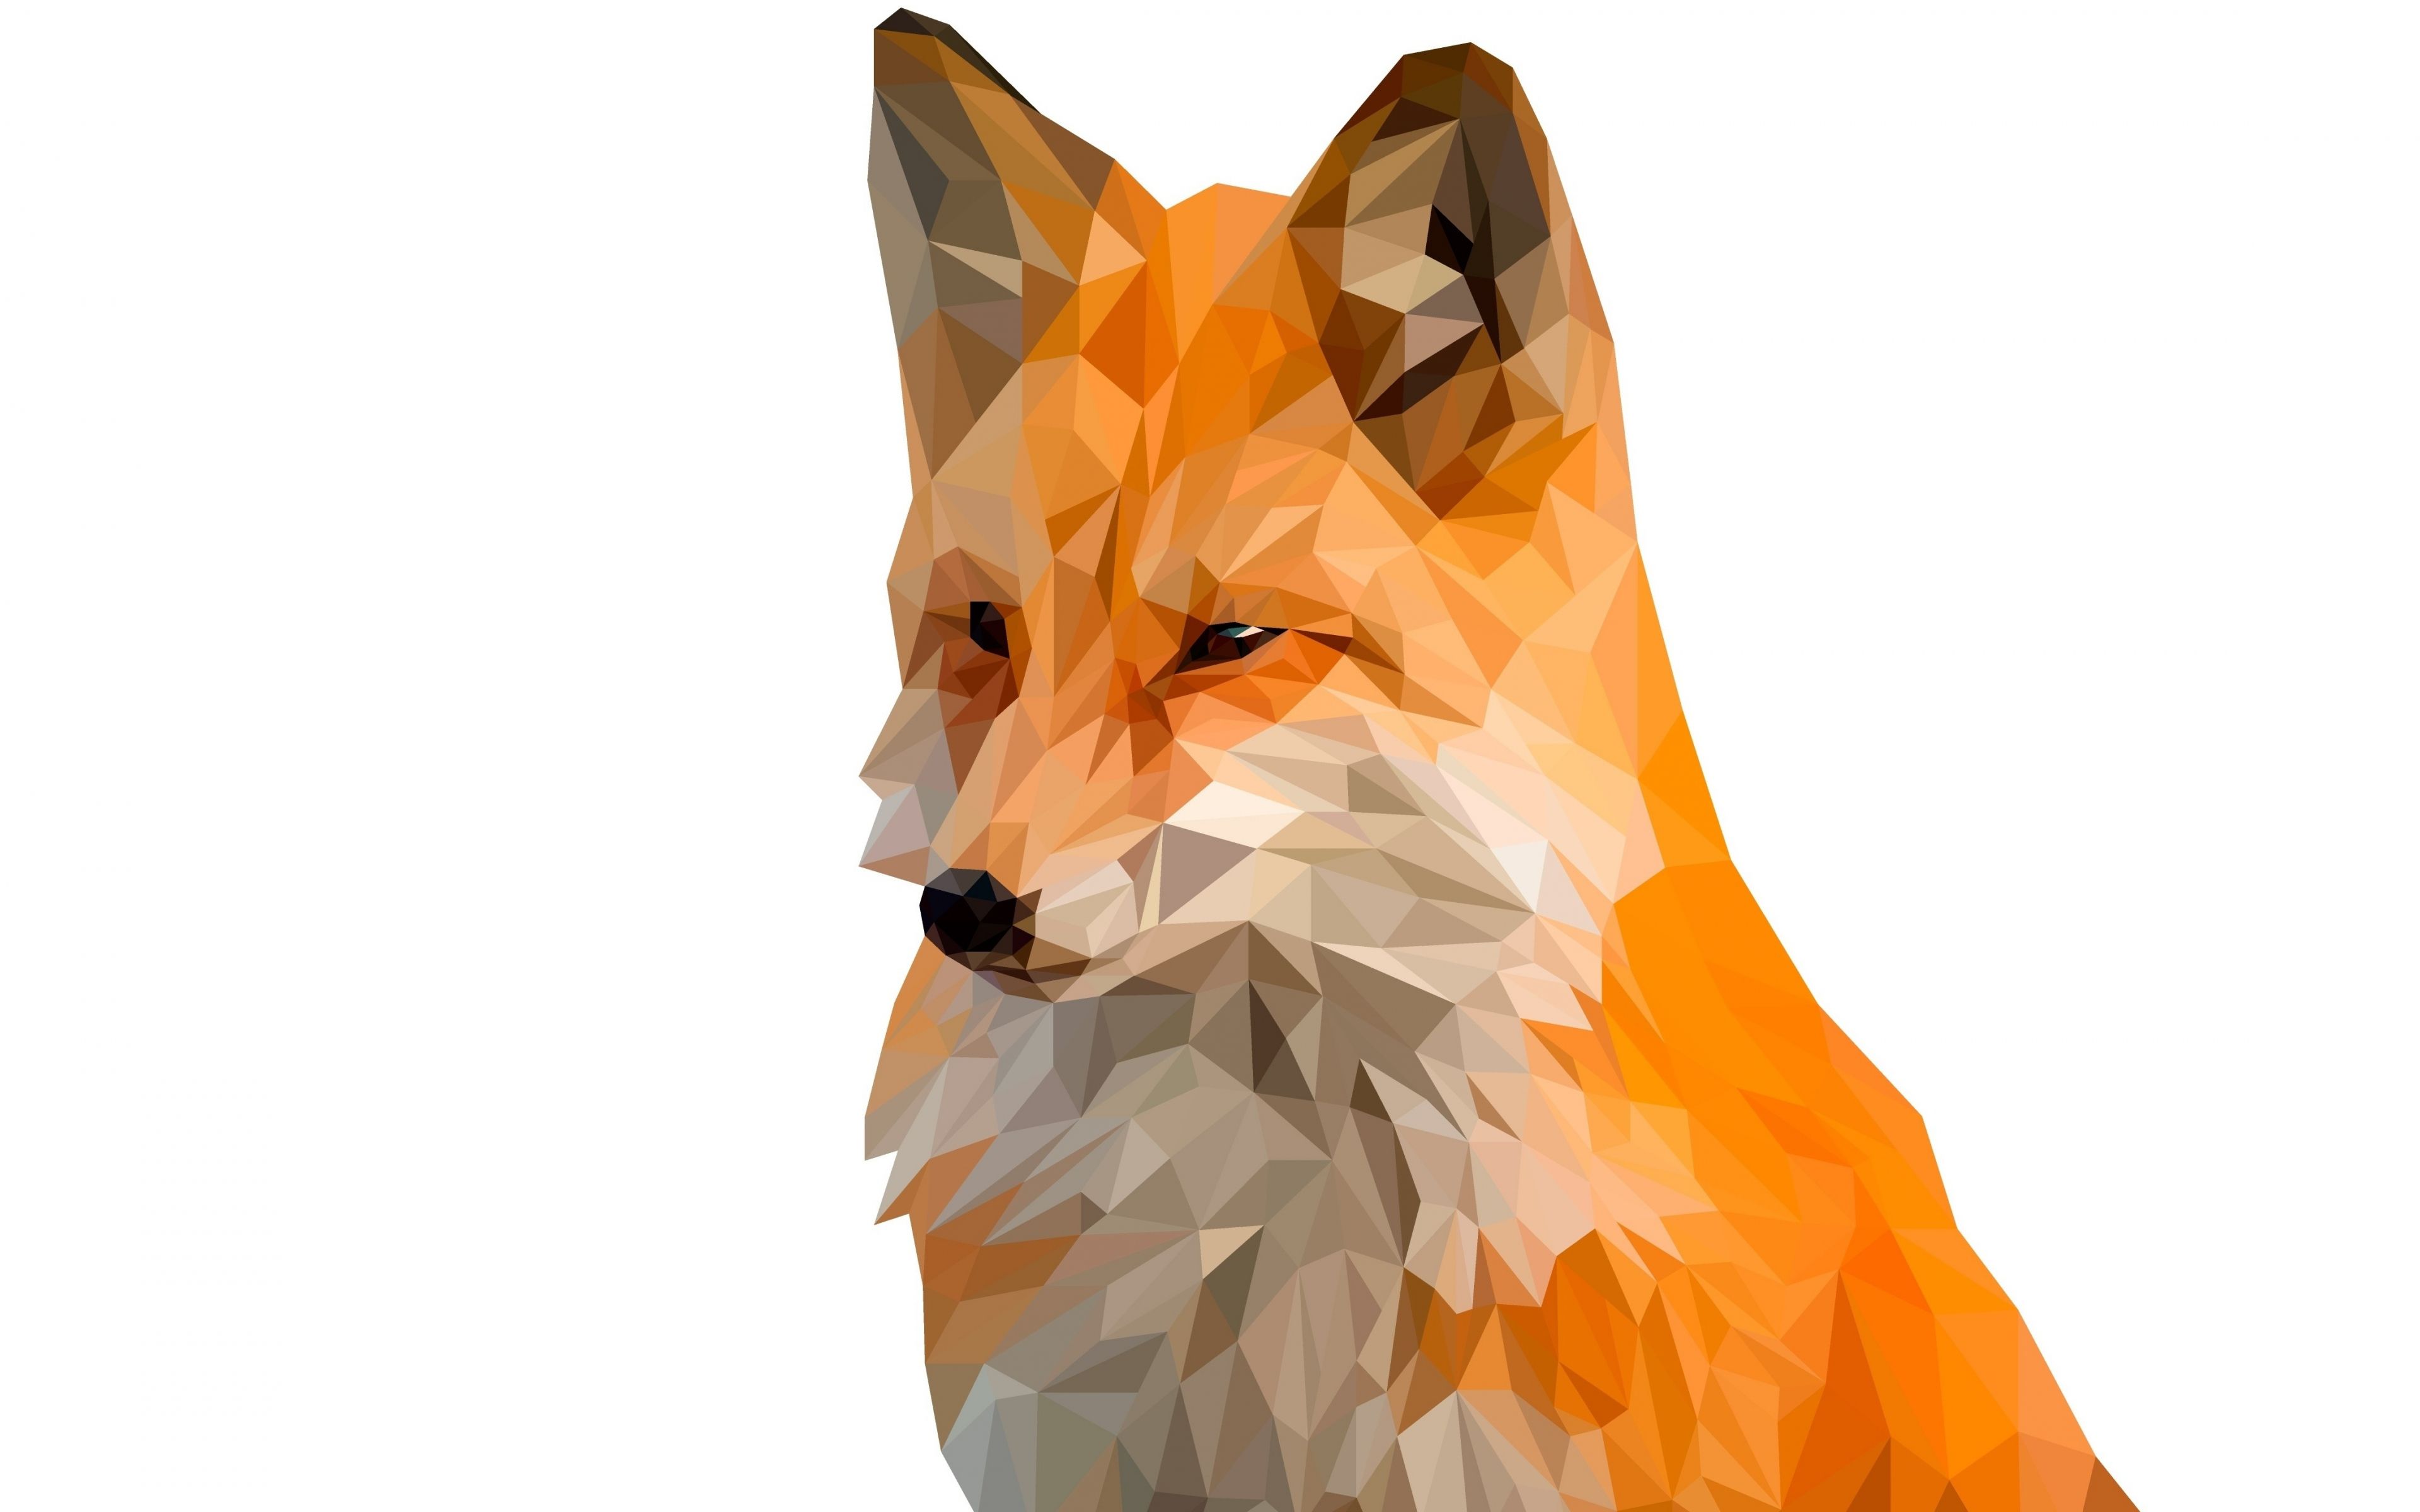 A 4K ultra hd wallpaper of a fox dressed in a computer